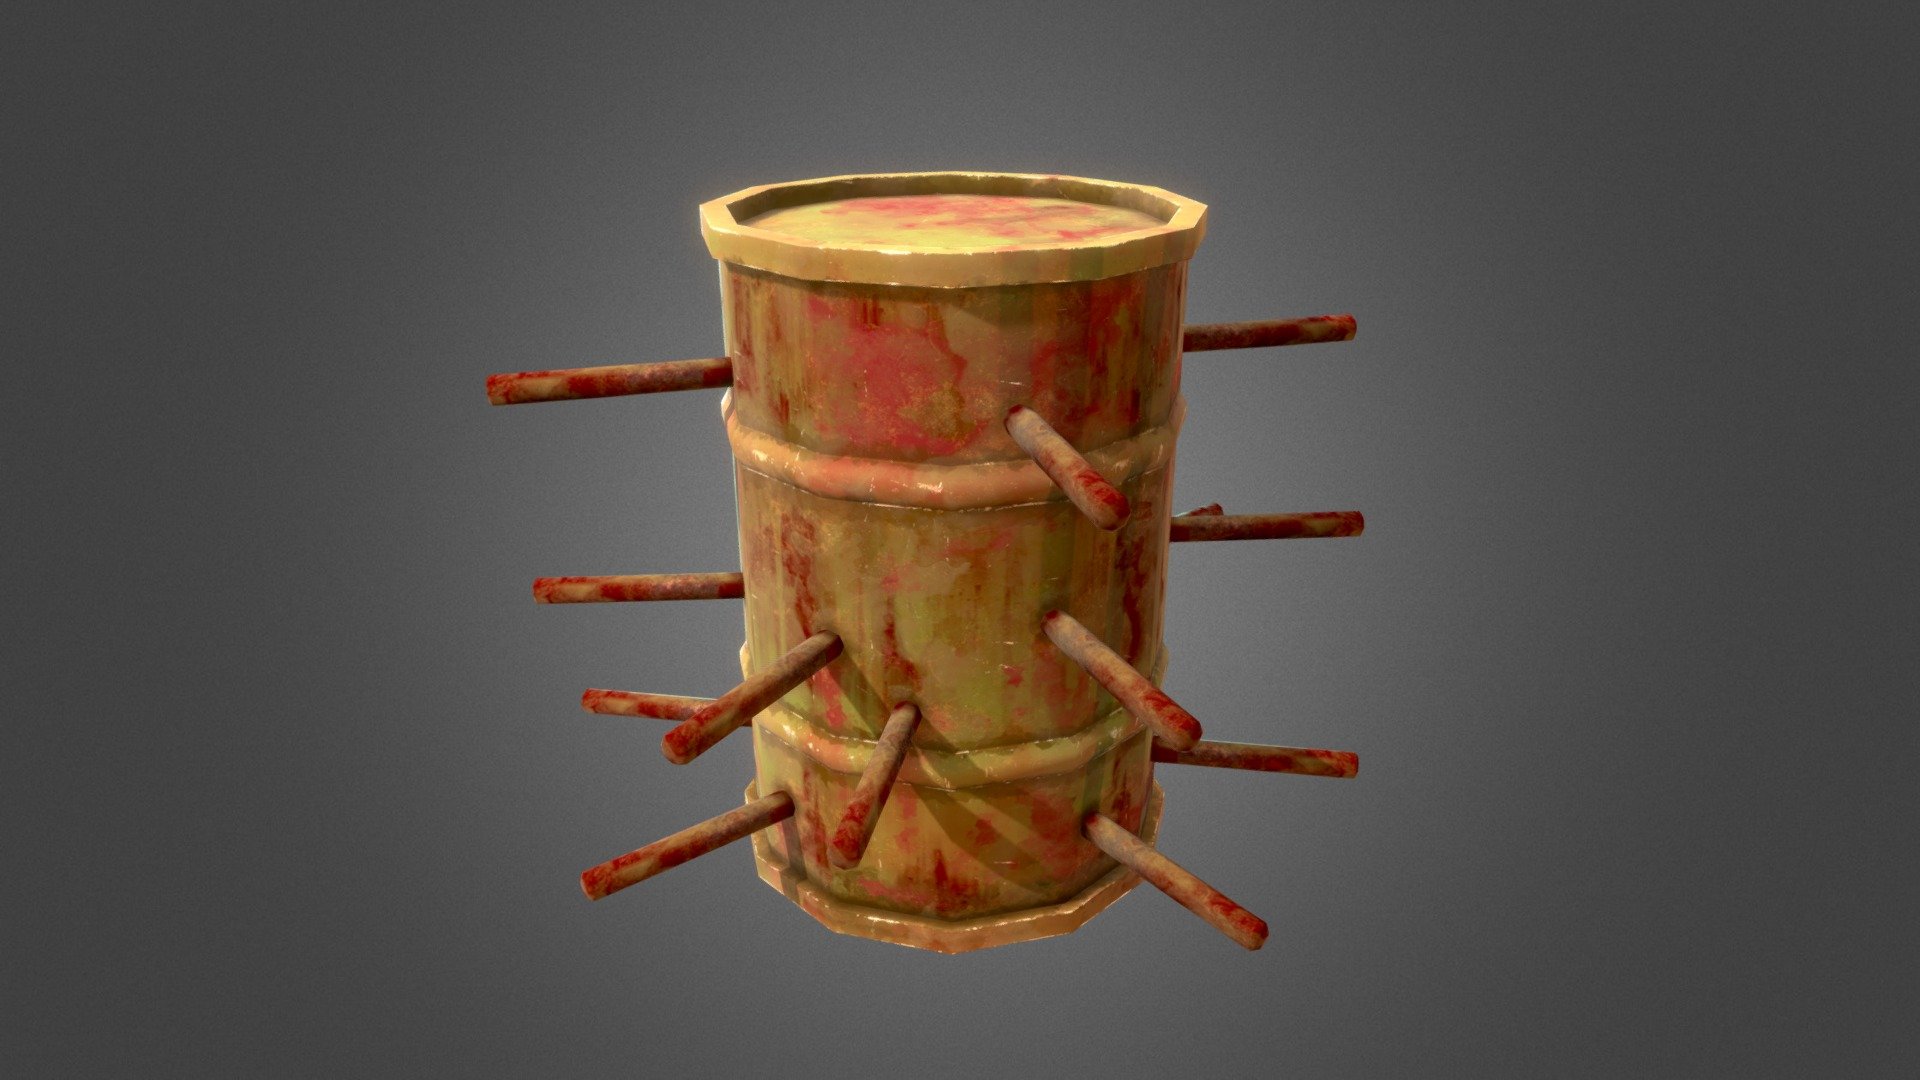 Low Poly Stylized Gas Drum for your renders and games

Textures:

Diffuse color, Roughness, Height, Metallic, Normal

All textures are 2K

Files Formats:

Blend

Fbx

Obj - Stylized Gas Drum - Buy Royalty Free 3D model by Vanessa Araújo (@vanessa3d) 3d model